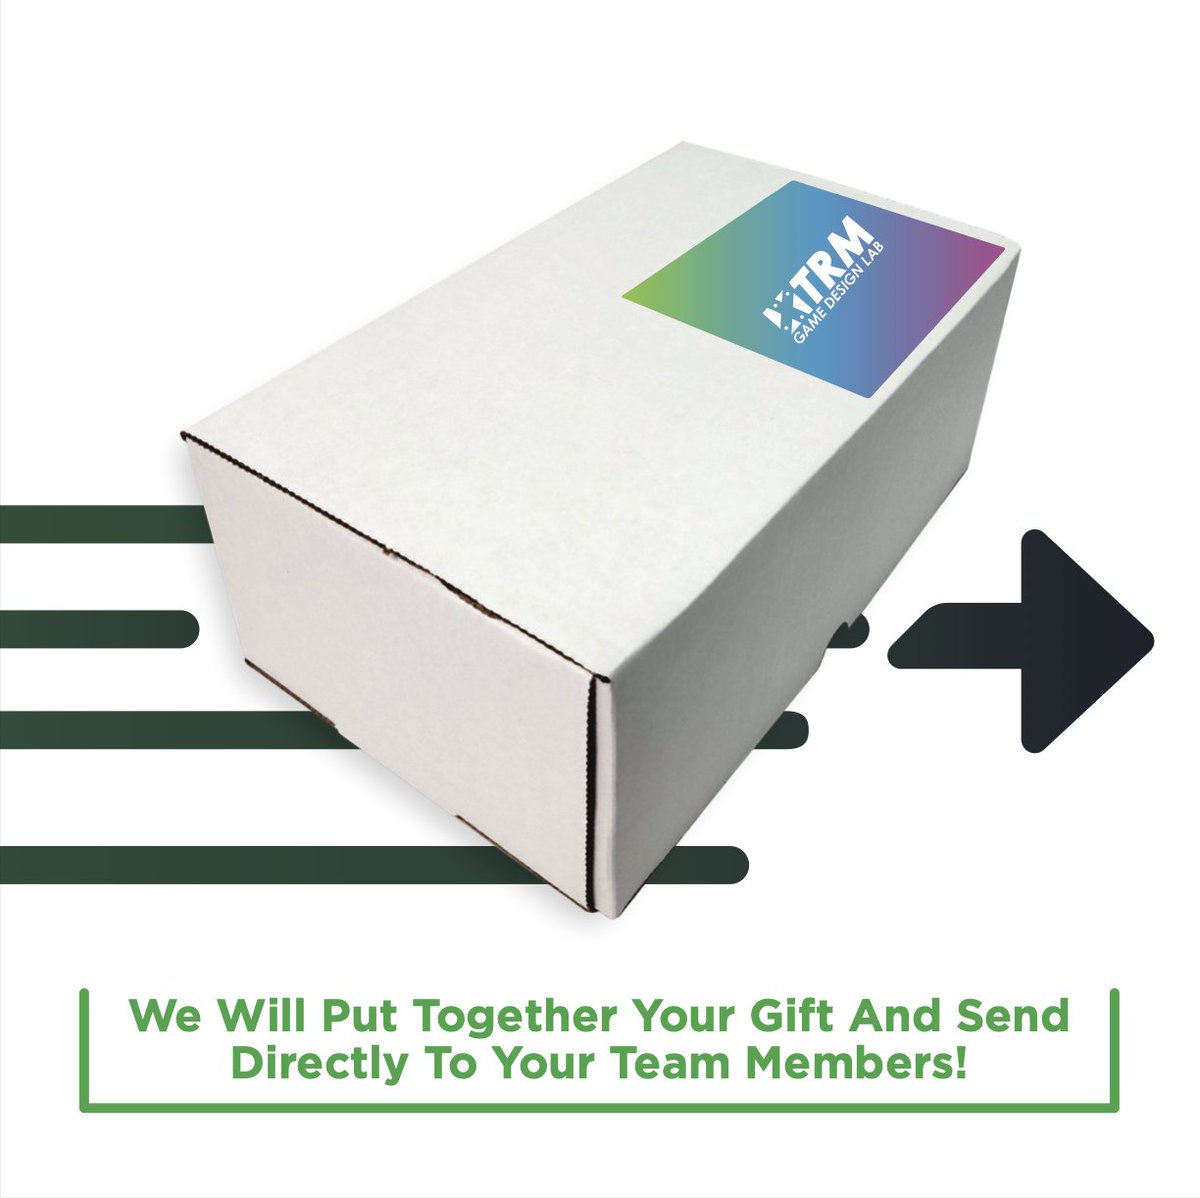 Let us craft personalized gift boxes for your brand with our convenient Brand-In-A-Box service. Show #appreciation to your team with carefully curated presents delivered straight to them. 

We take care of the details, allowing you to focus on what truly matters. #GiftBoxes